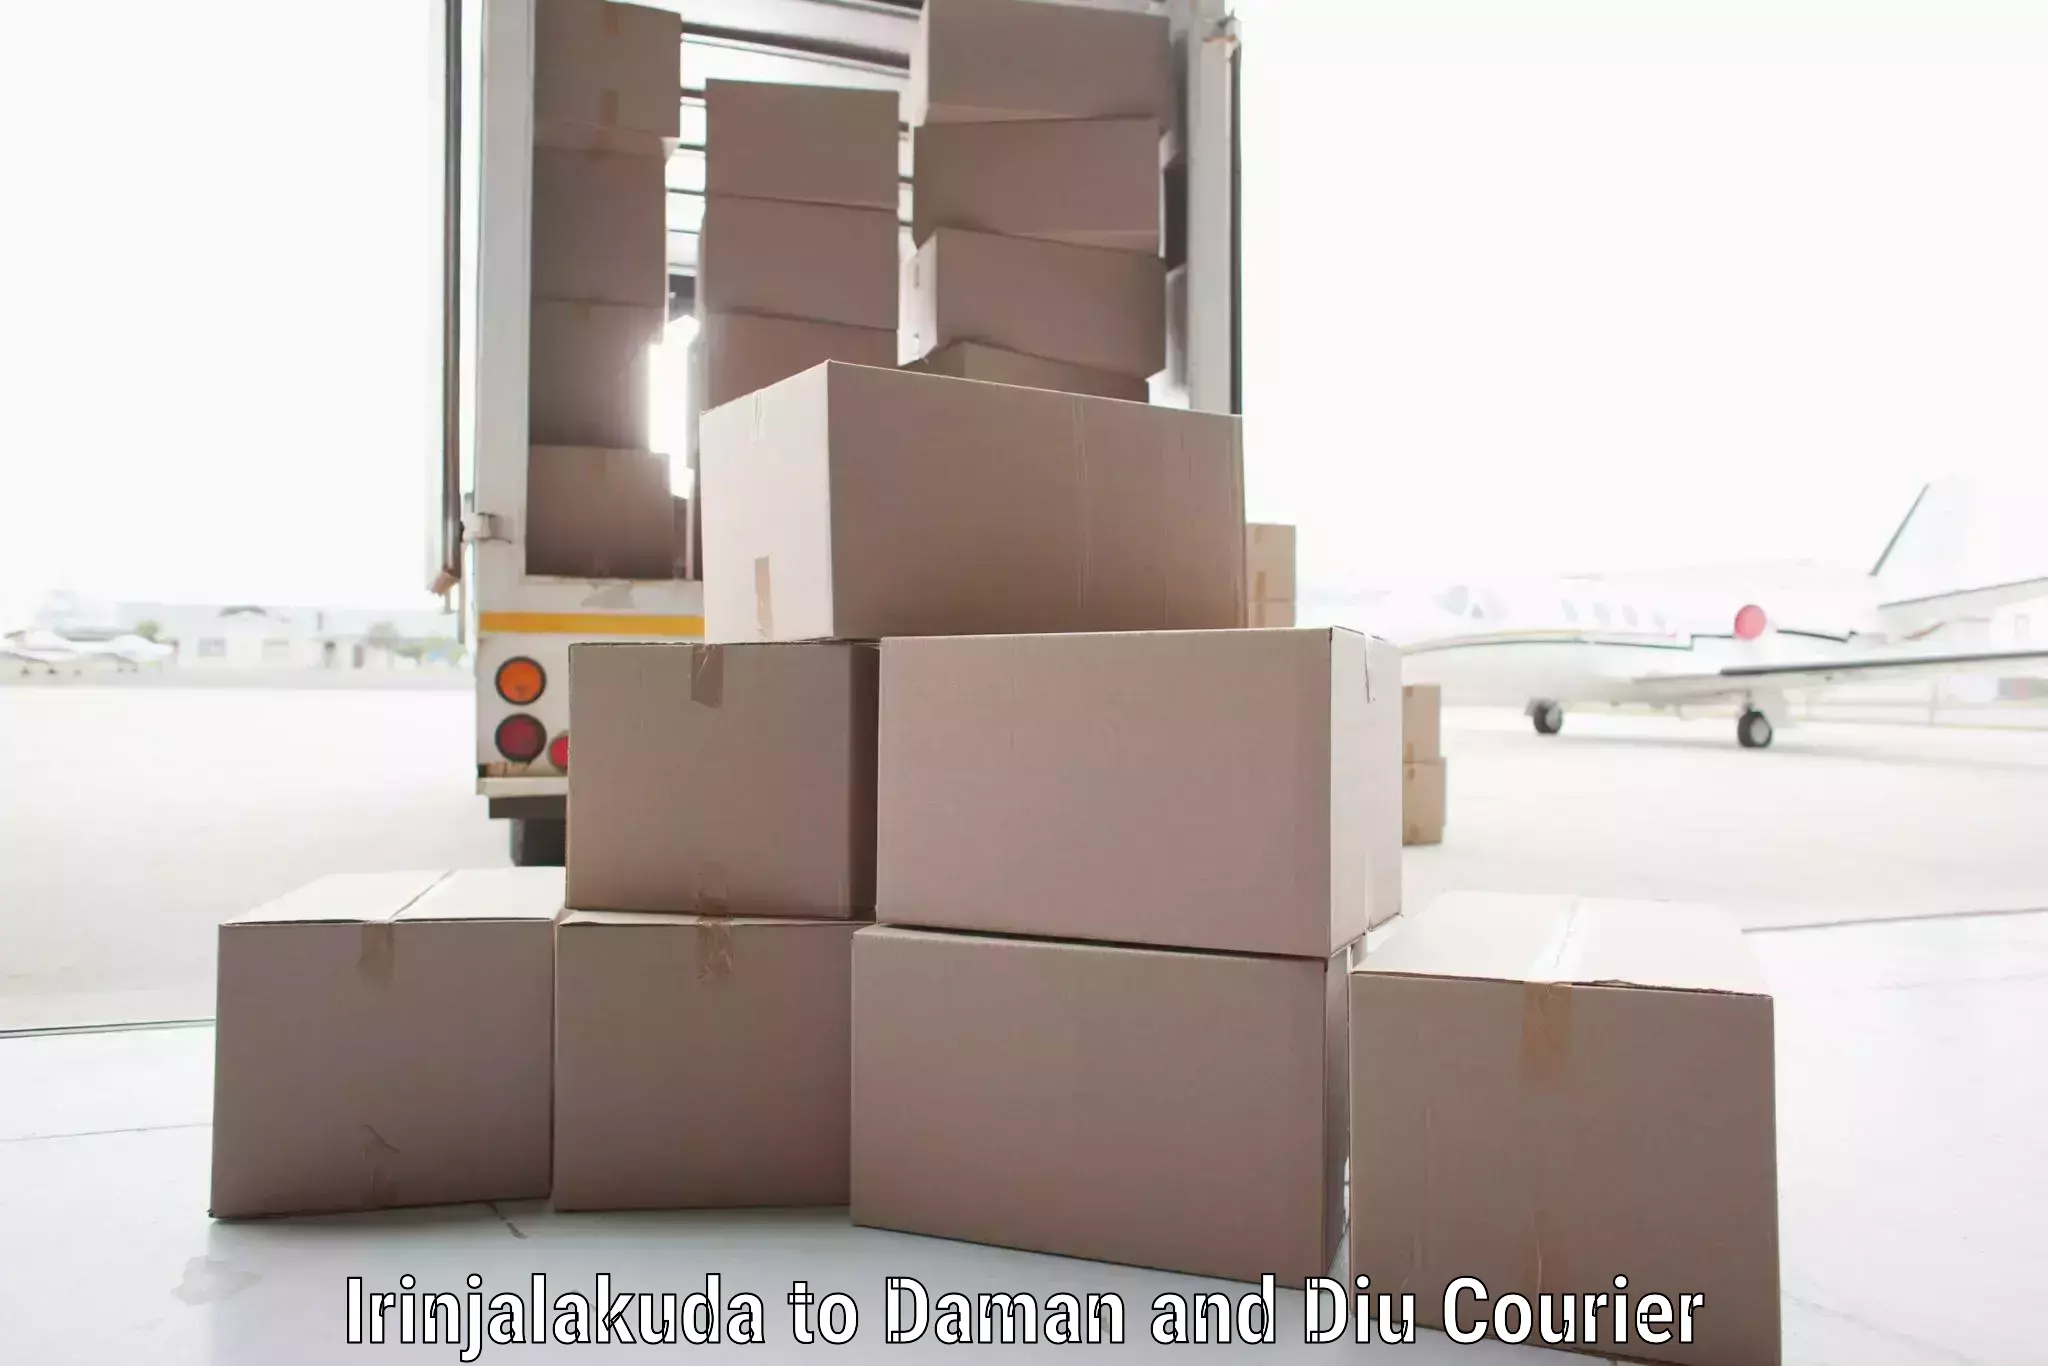 State-of-the-art courier technology Irinjalakuda to Diu